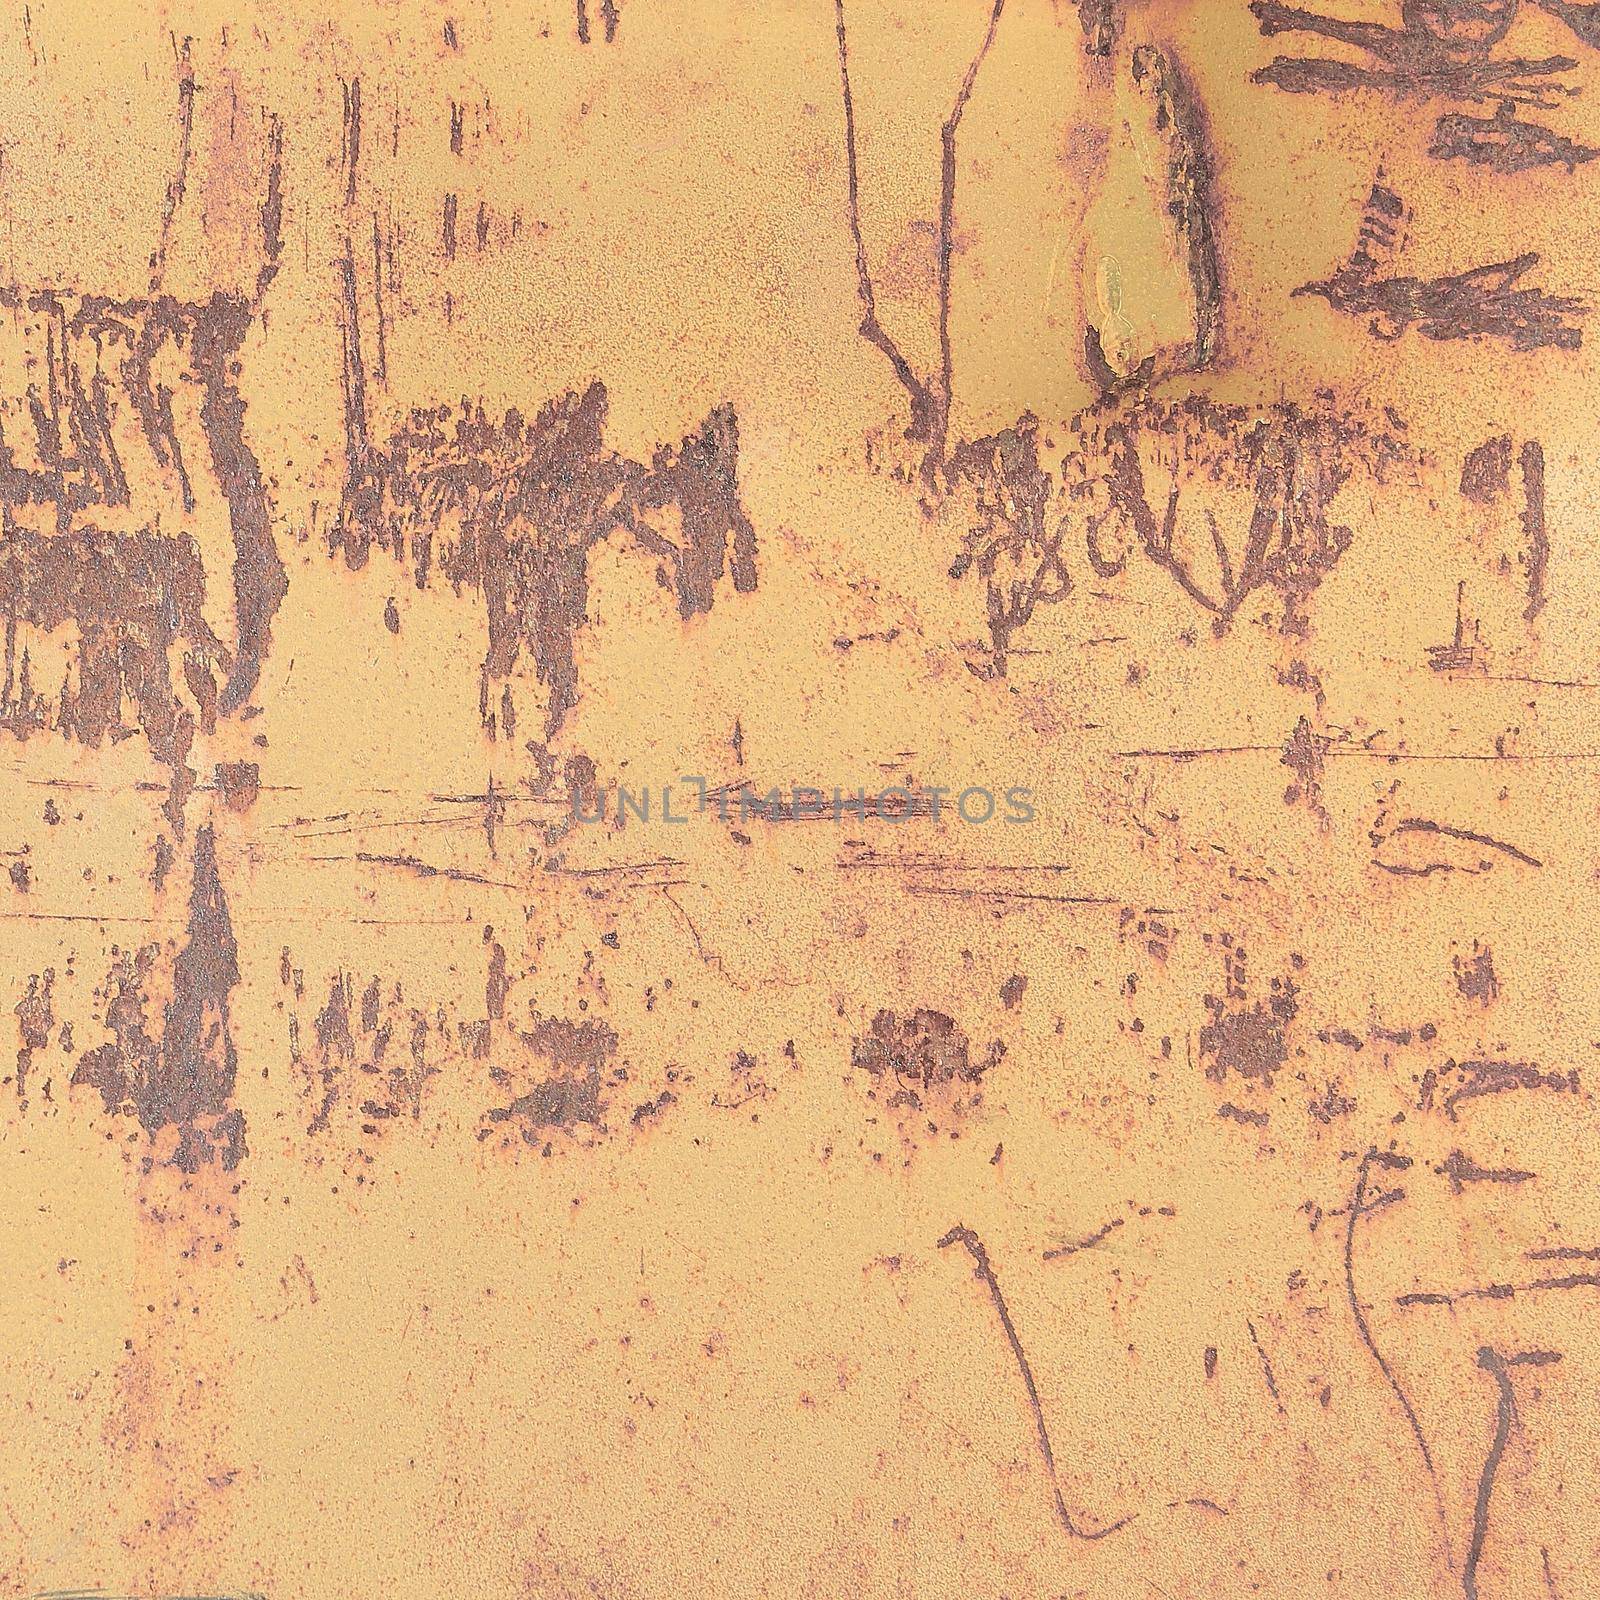 old rough surface with graffiti elements.abstract background by SmartPhotoLab